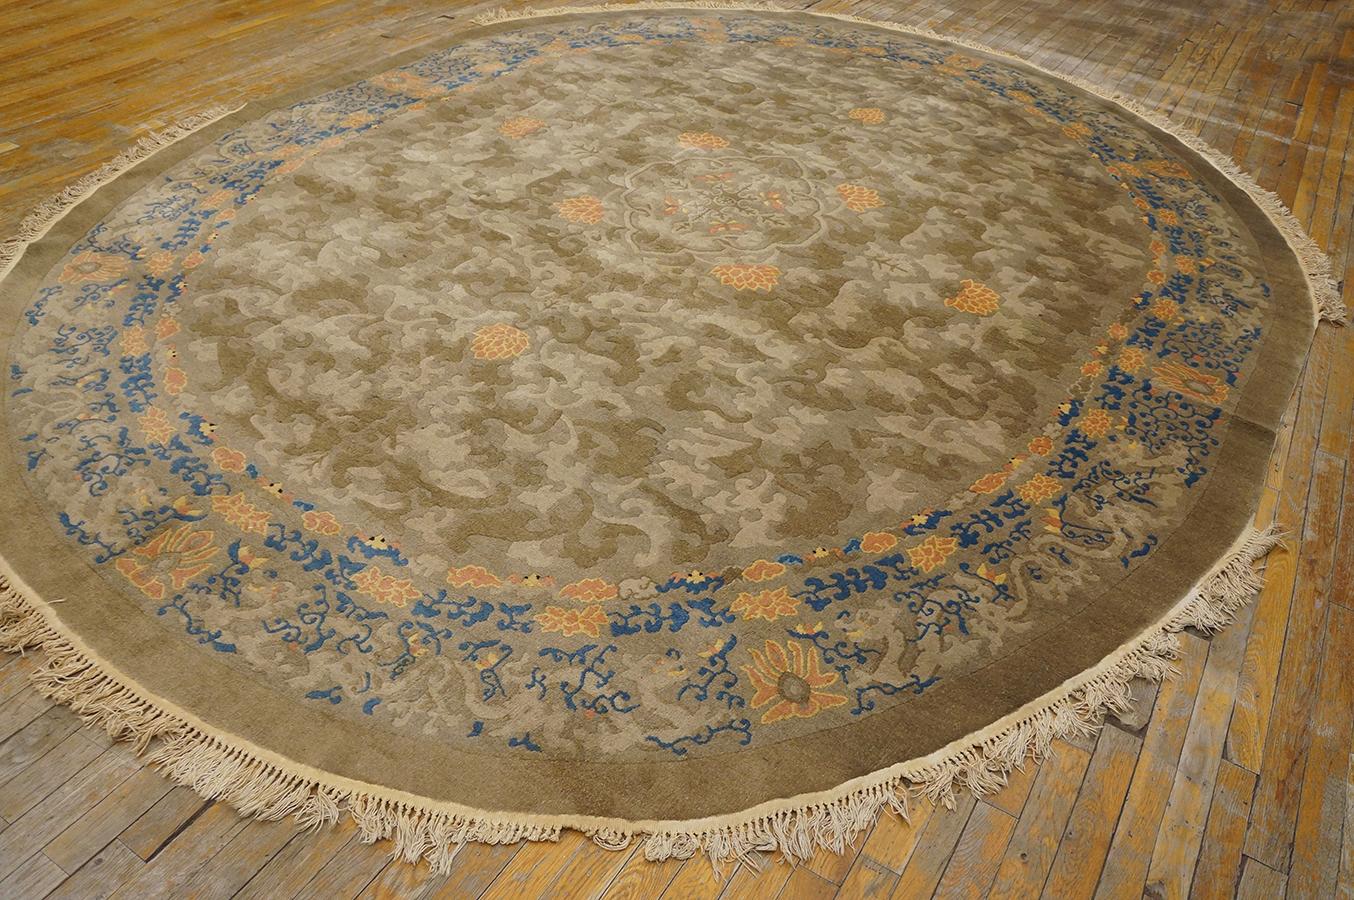 Late 19th Century Oval Chinese Perking Dragon Carpet 
9' x 11' 8